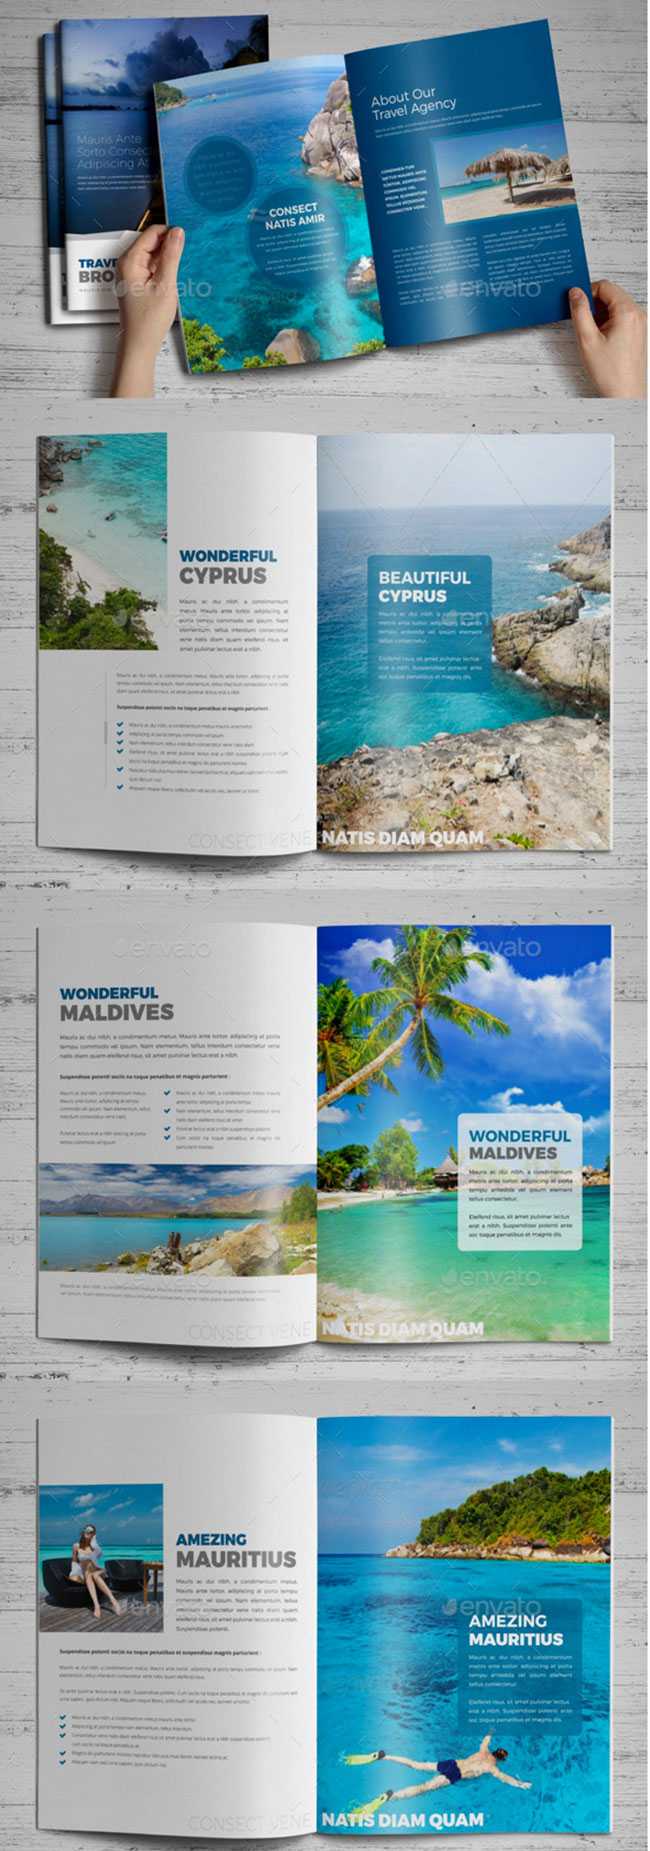 40+ Best Travel And Tourist Brochure Design Templates 2019 Intended For Travel And Tourism Brochure Templates Free